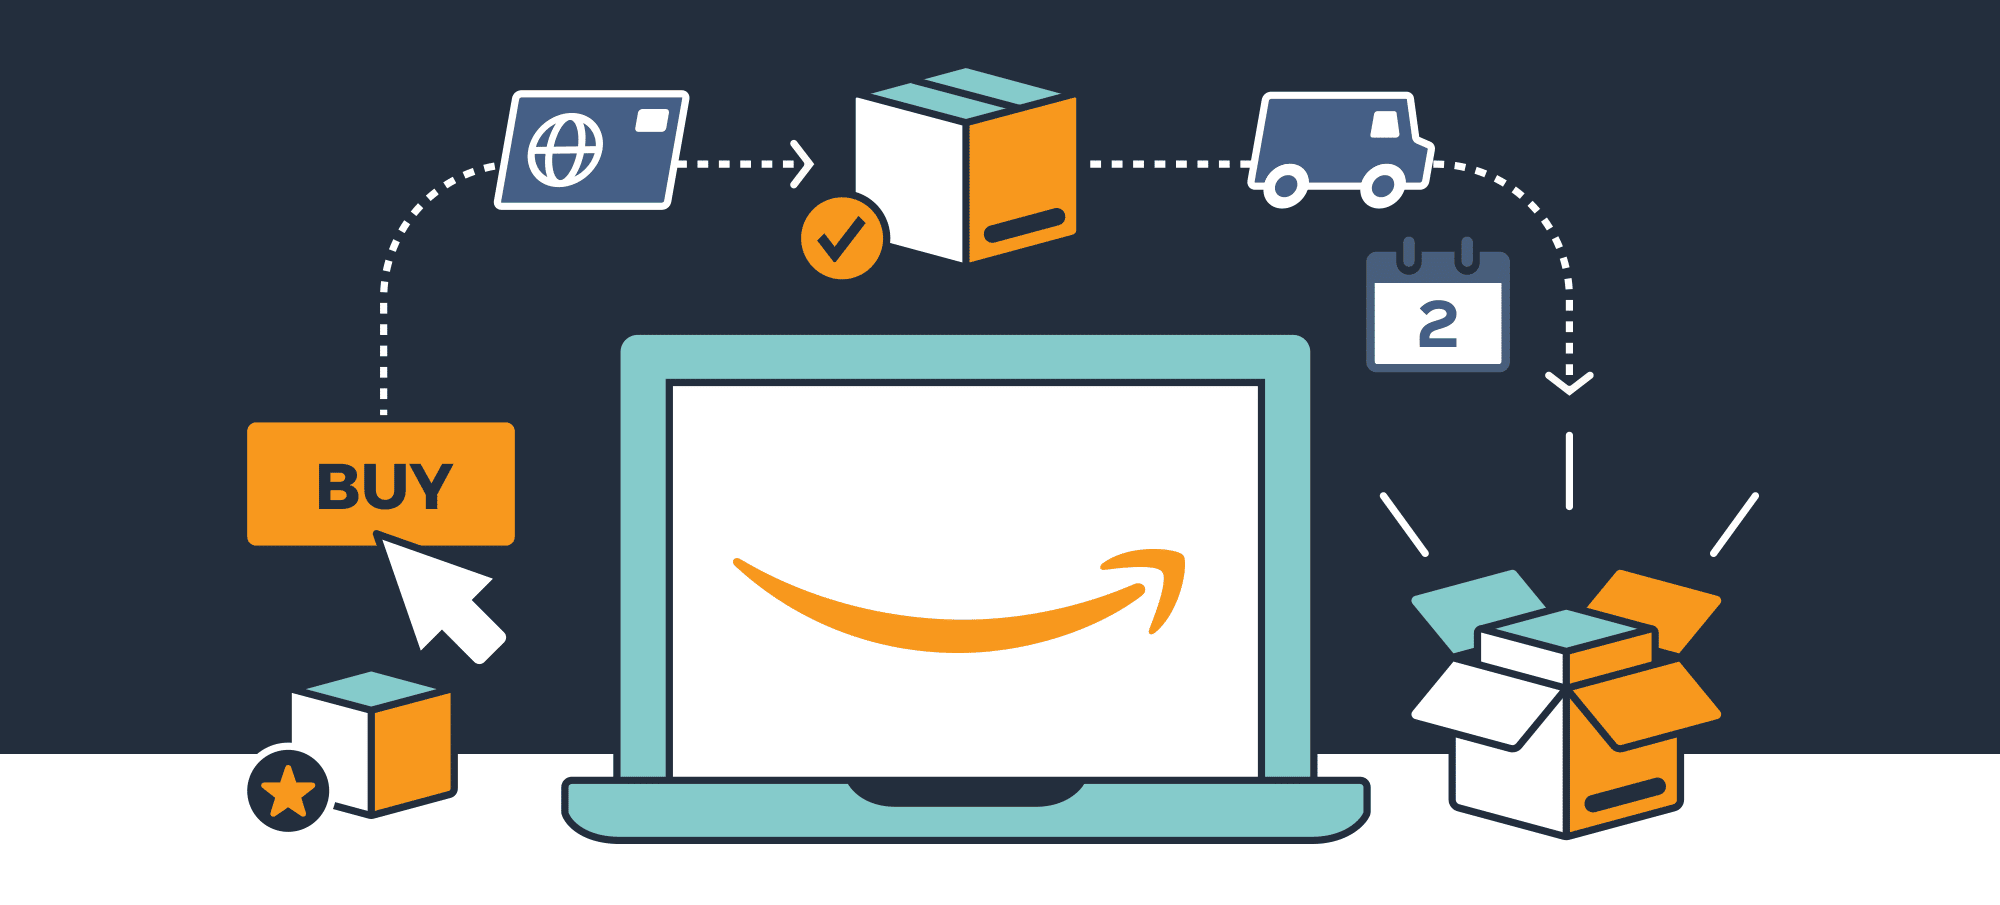 Amazon Seller Overview: 3 Effective Tips Every Amazon Vendor Need To Know